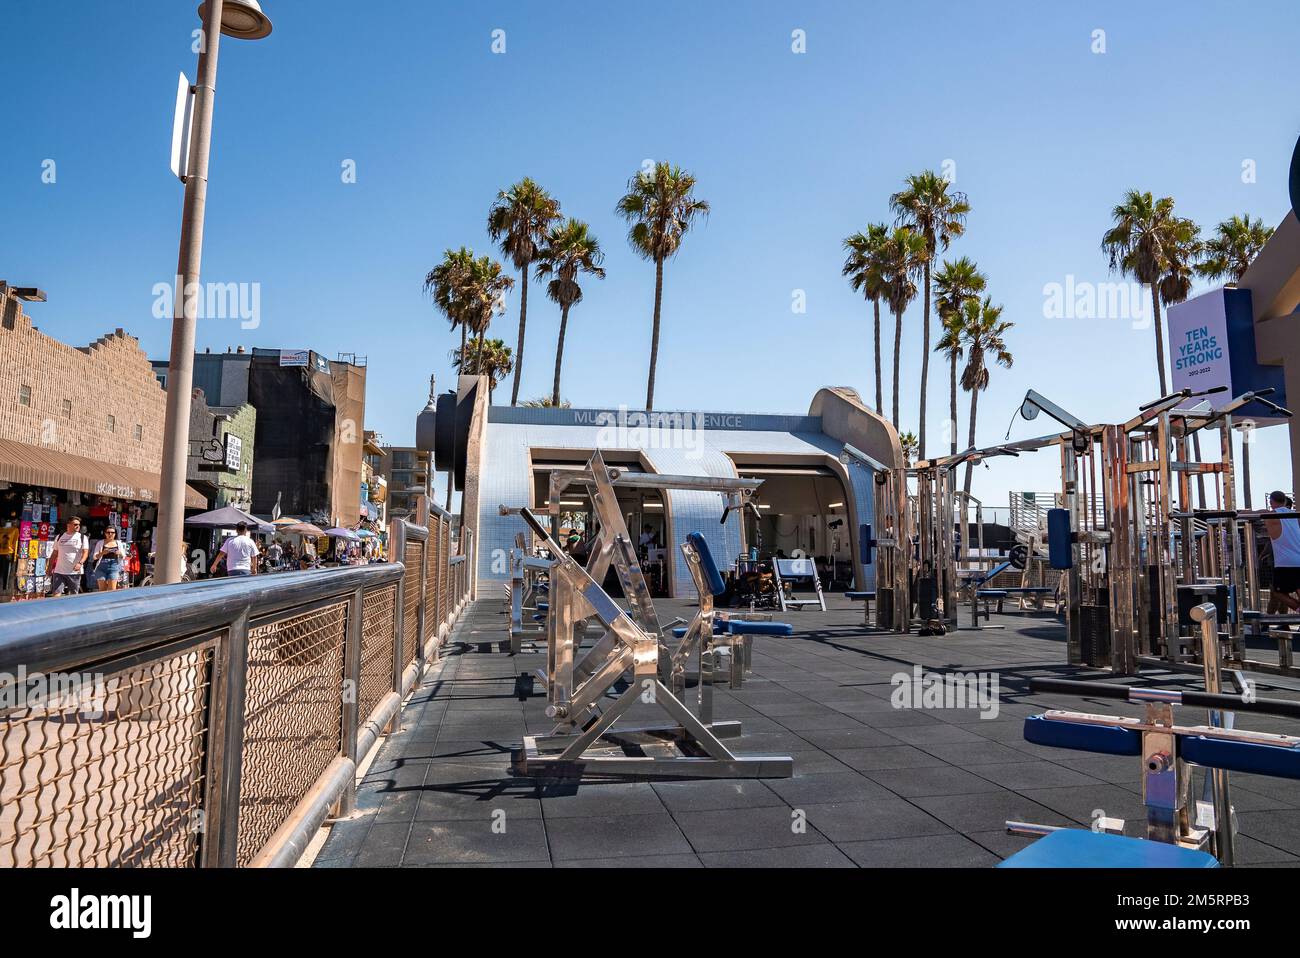 Exercise equipment in open gym at Muscle beach during summer Stock Photo